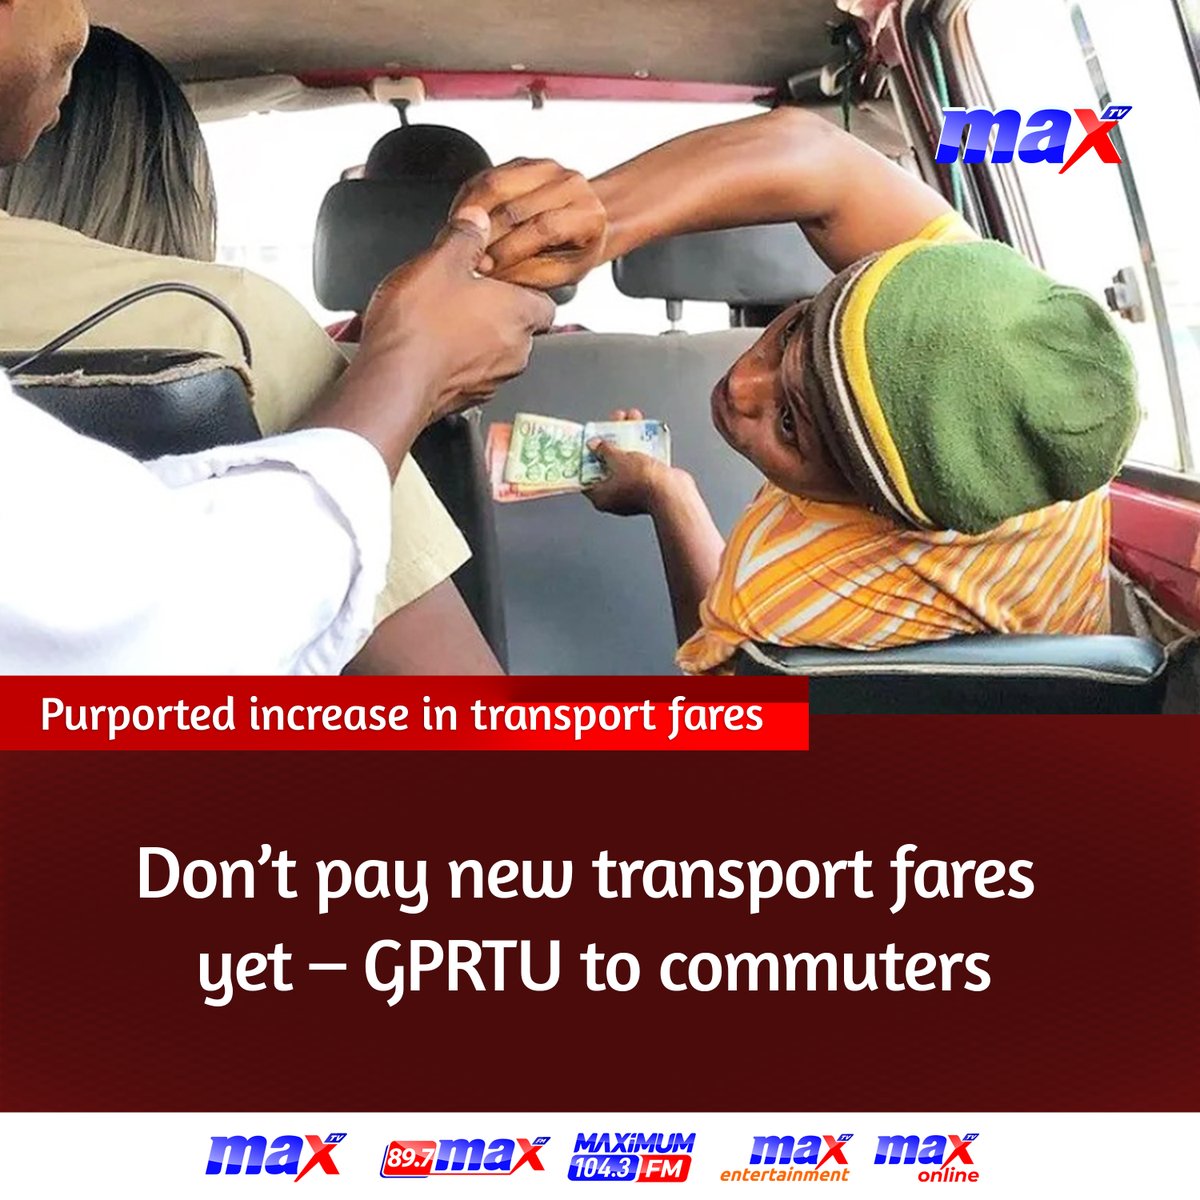 Purported increase in transport fares: Don’t pay new transport fares yet – GPRTU to commuters. #MaxTV #MaxOnline #MaxNews